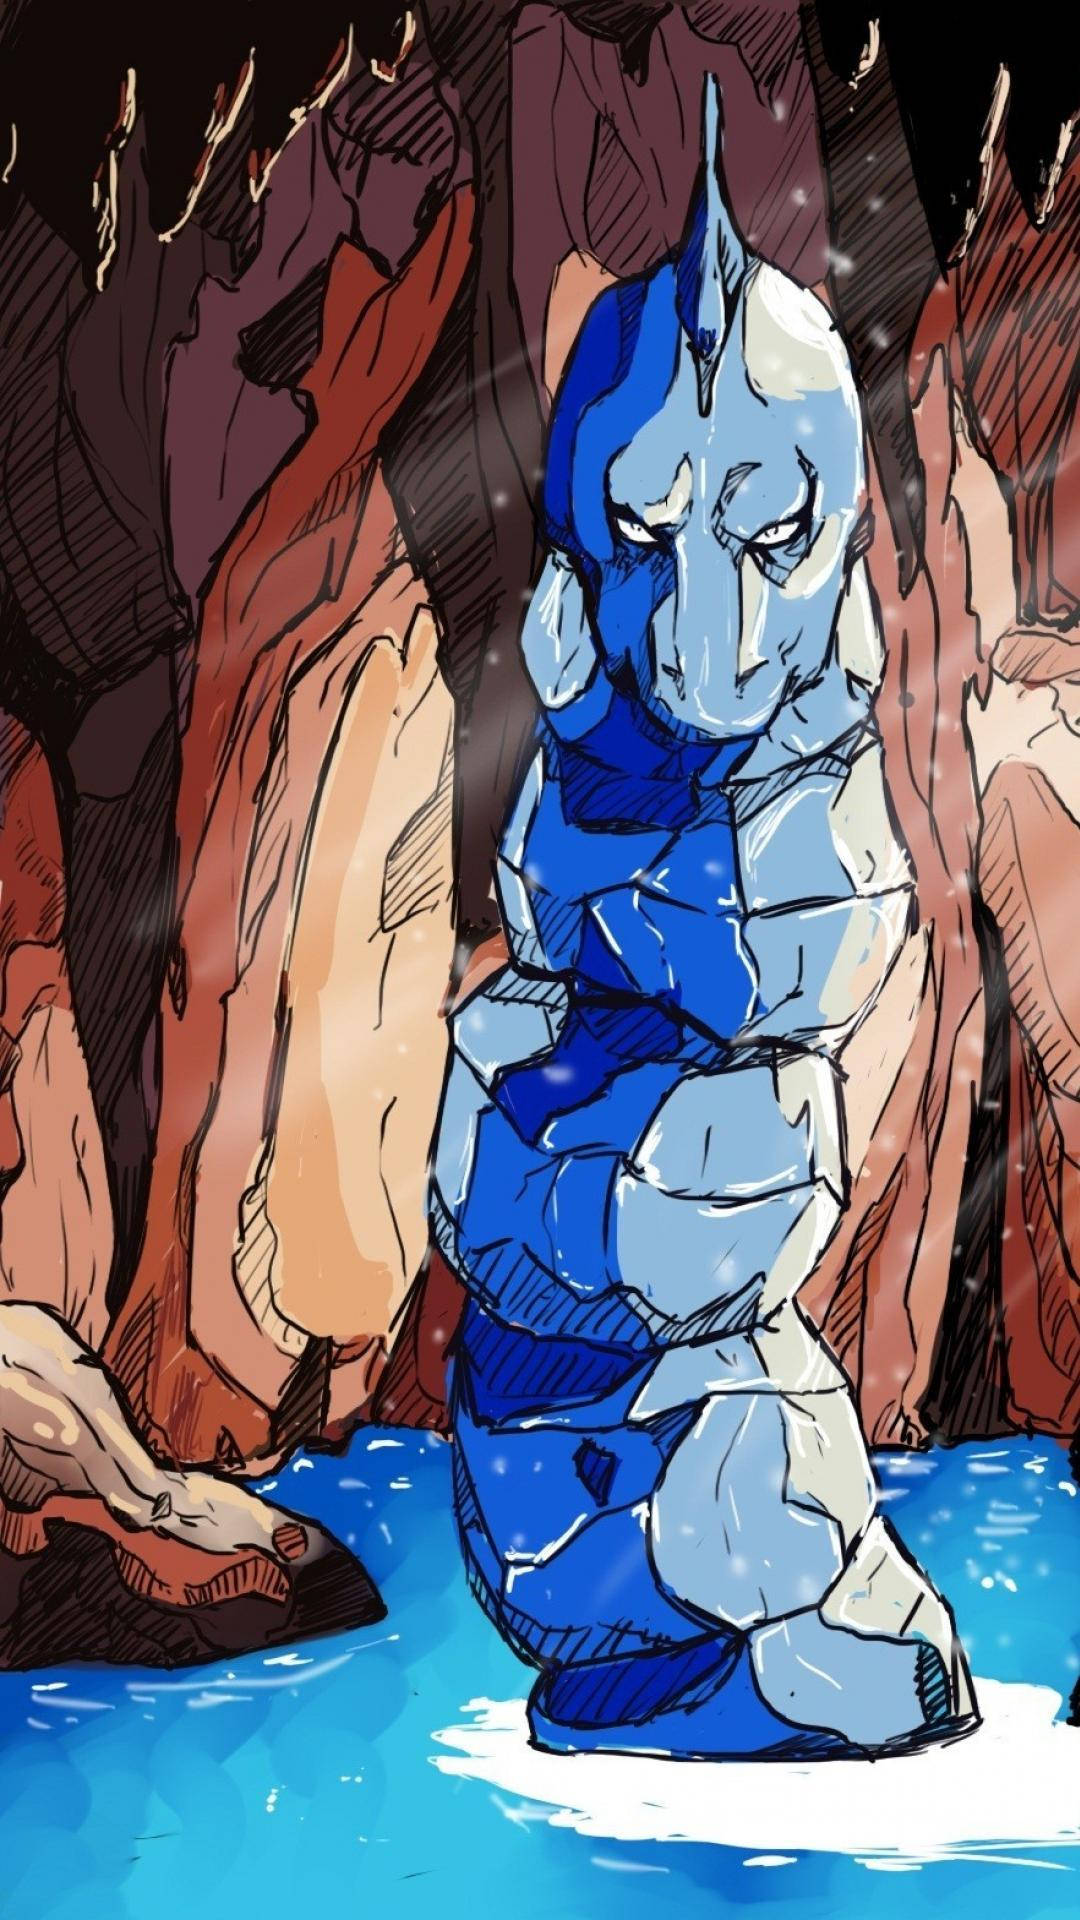 st The Crystal Onix The Crystal Iwarkfrom Pokemon 1